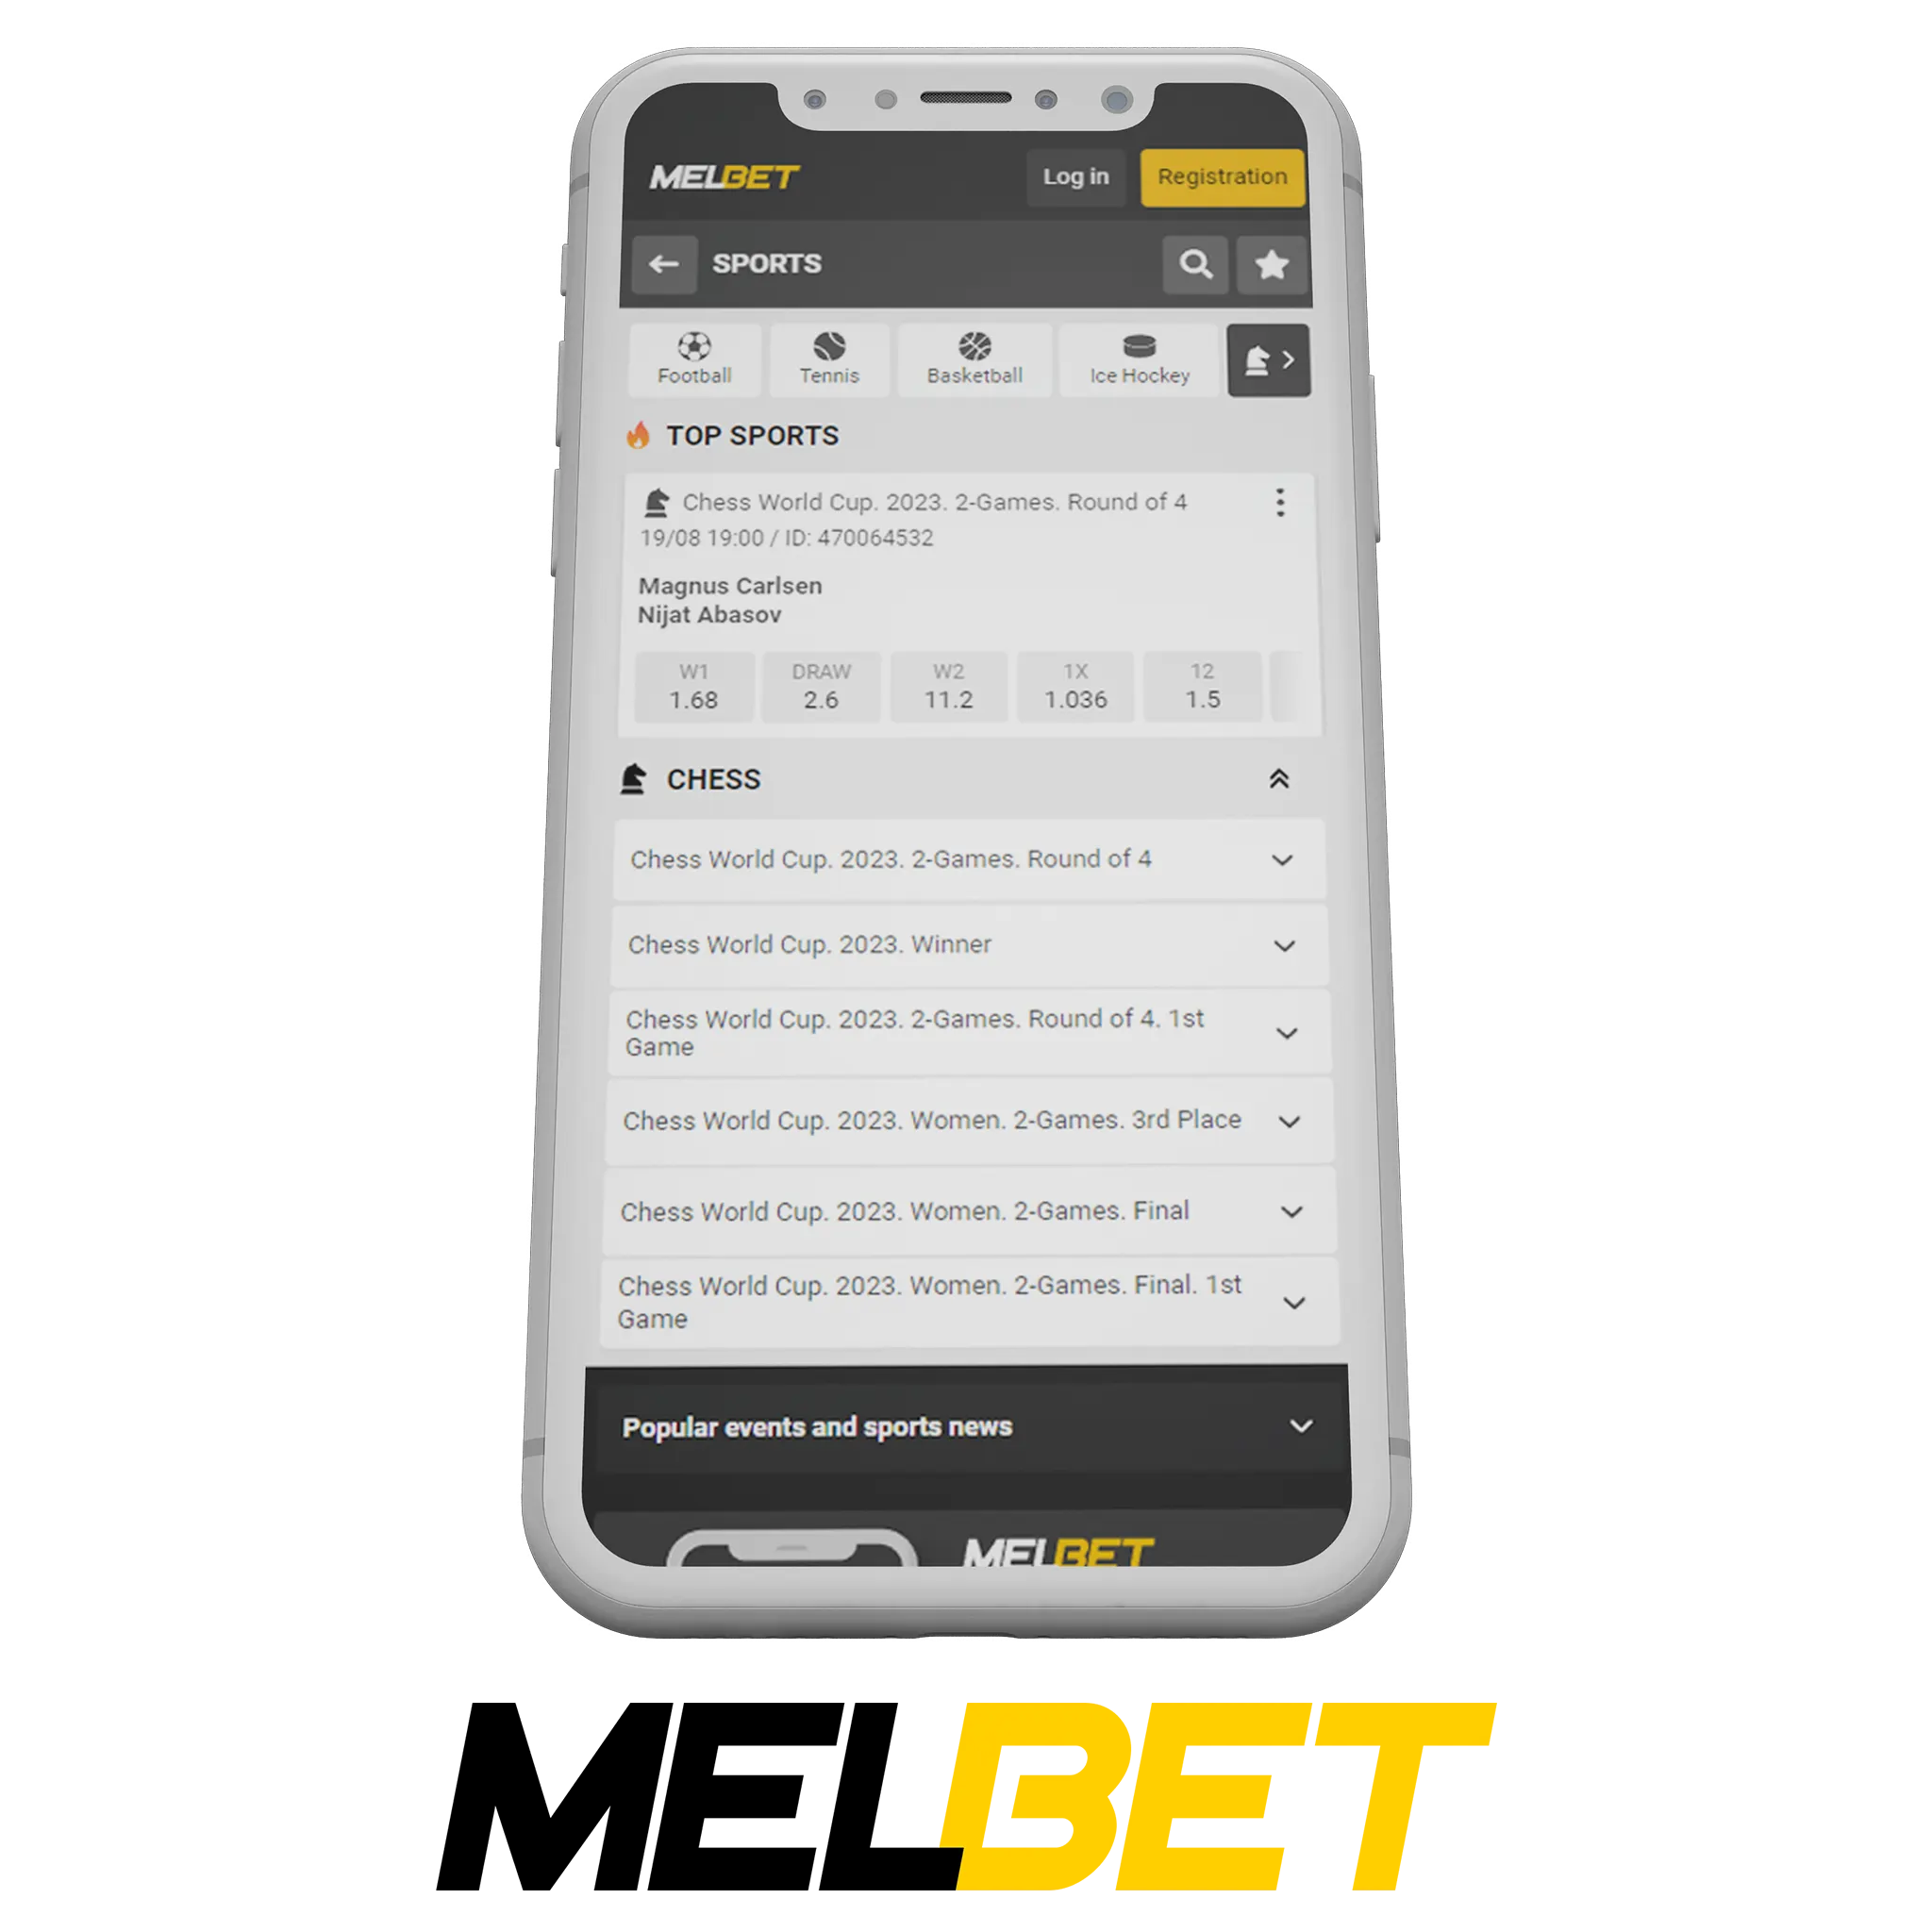 Download Melbet application for Android and iOS and enjoy chess live betting.